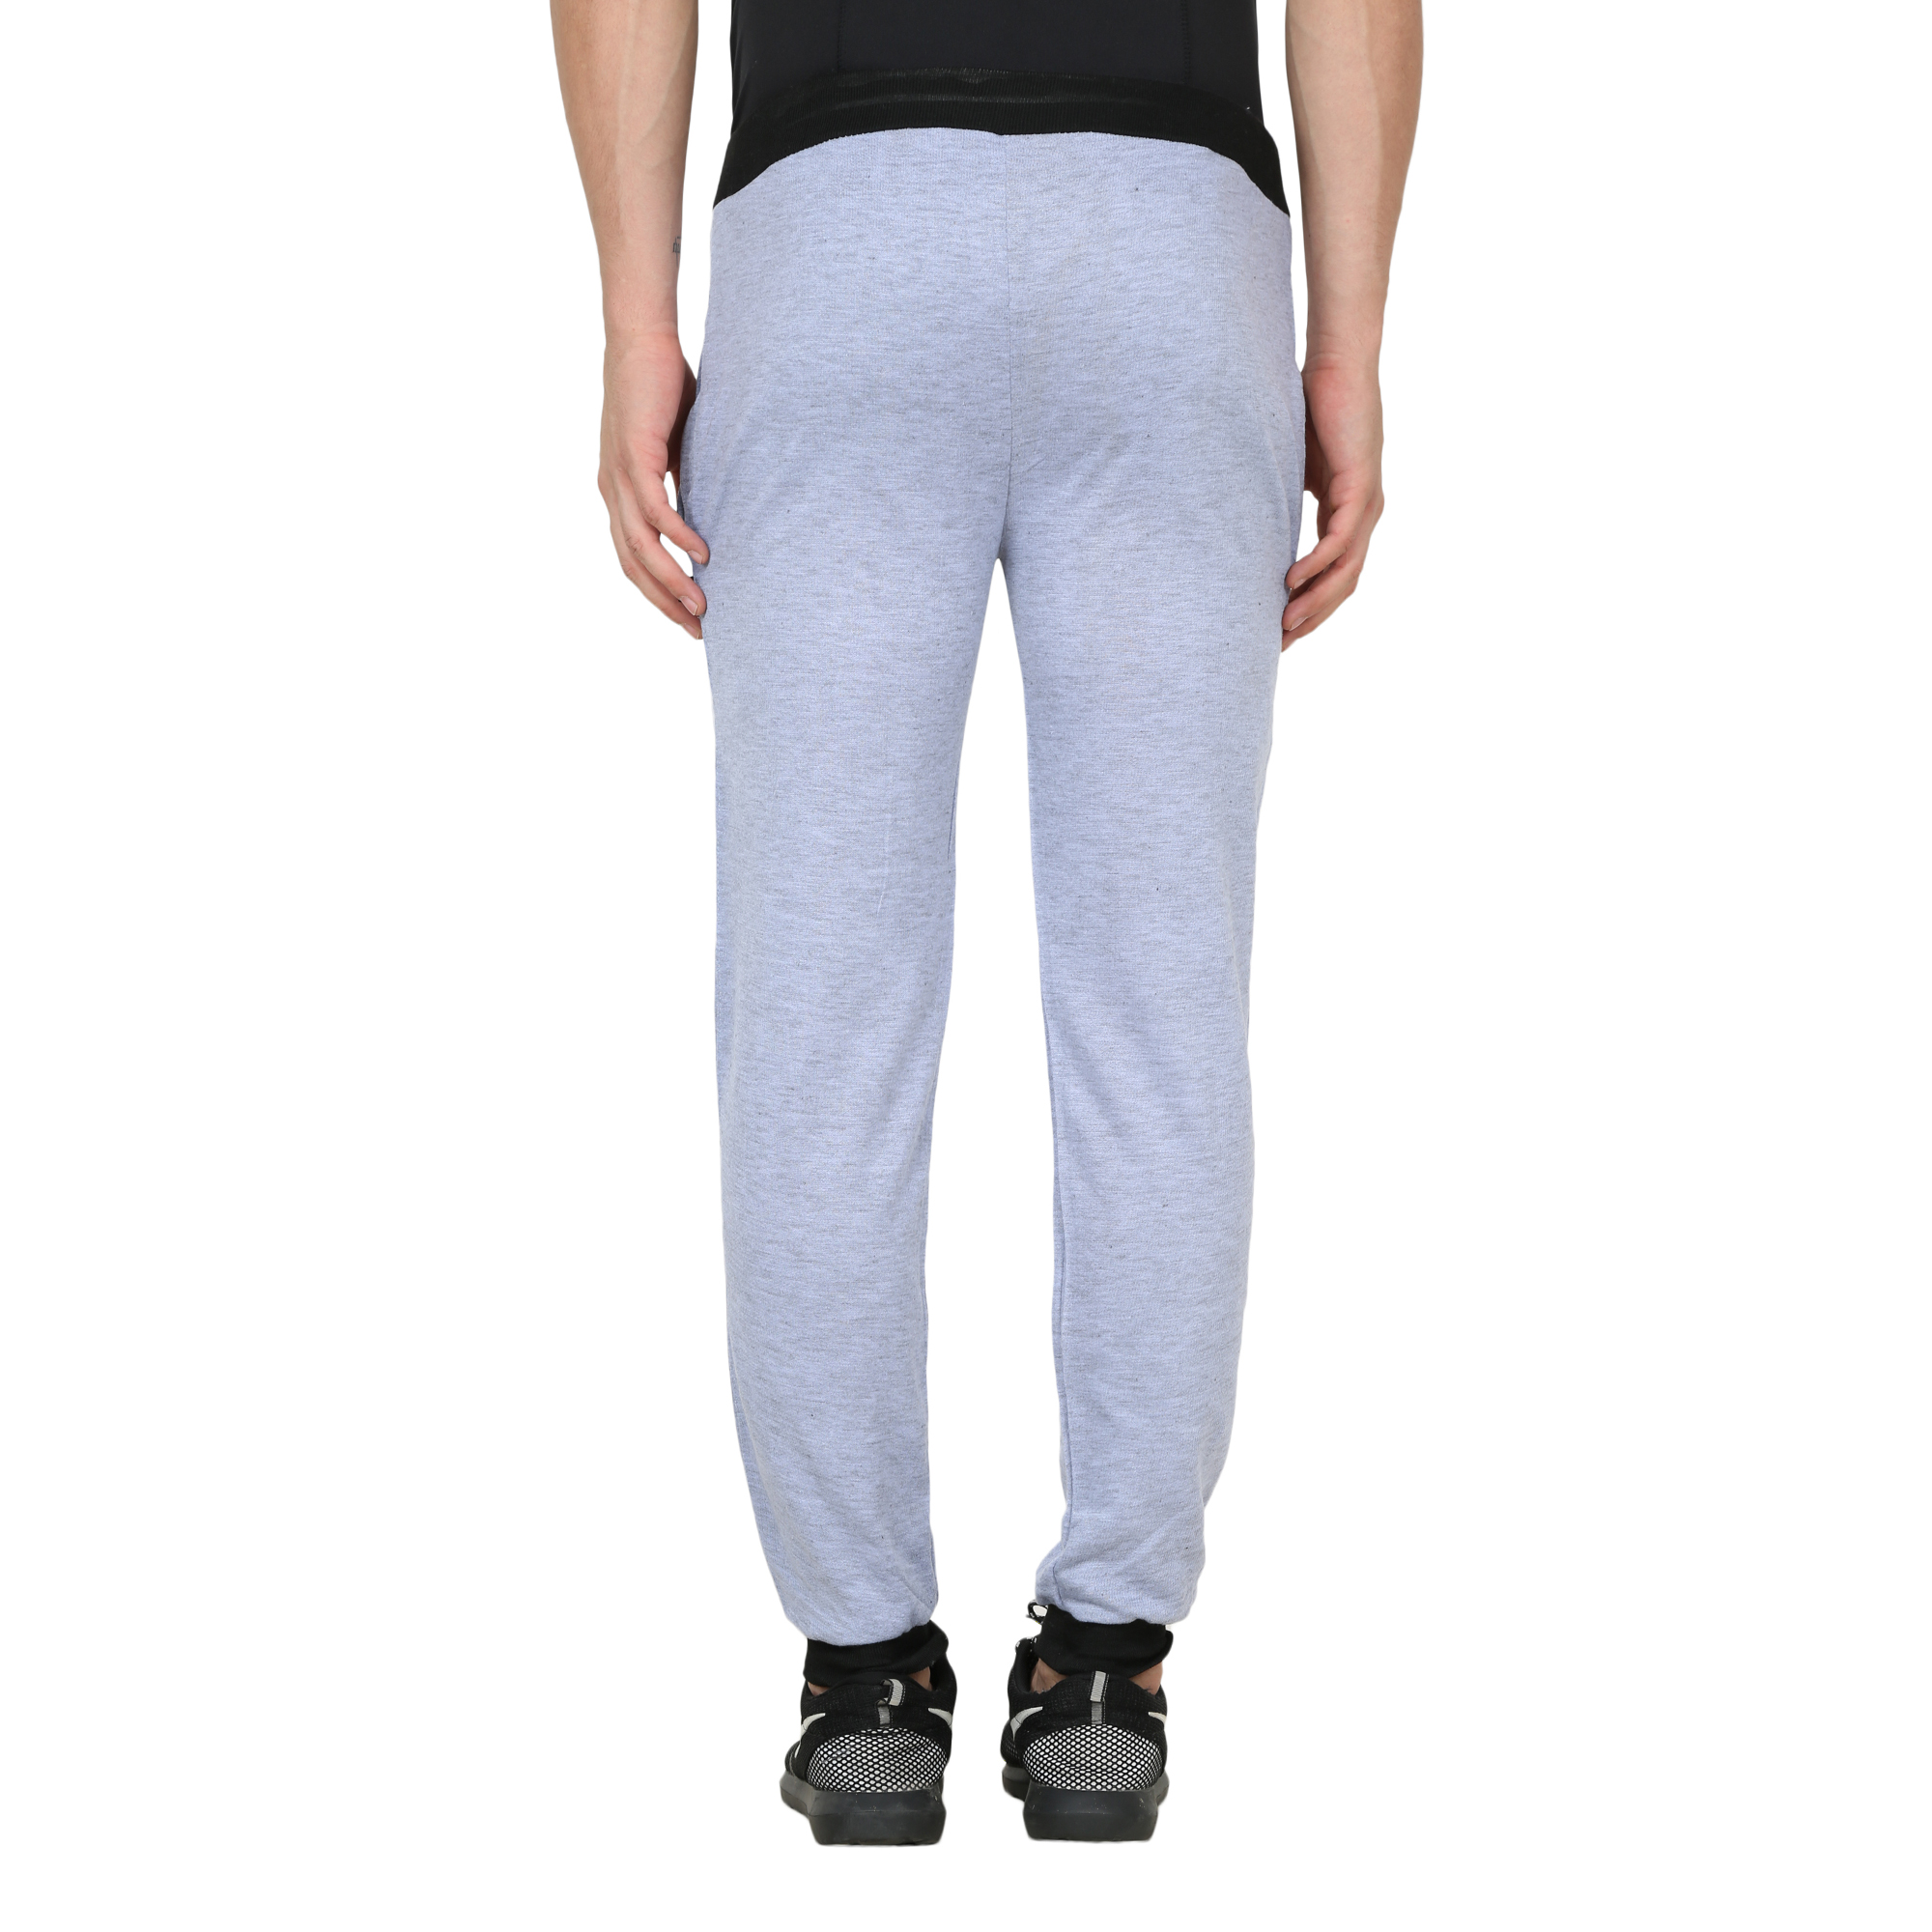 Buy Swaggy Solid Men's Track Pants Online @ ₹349 from ShopClues